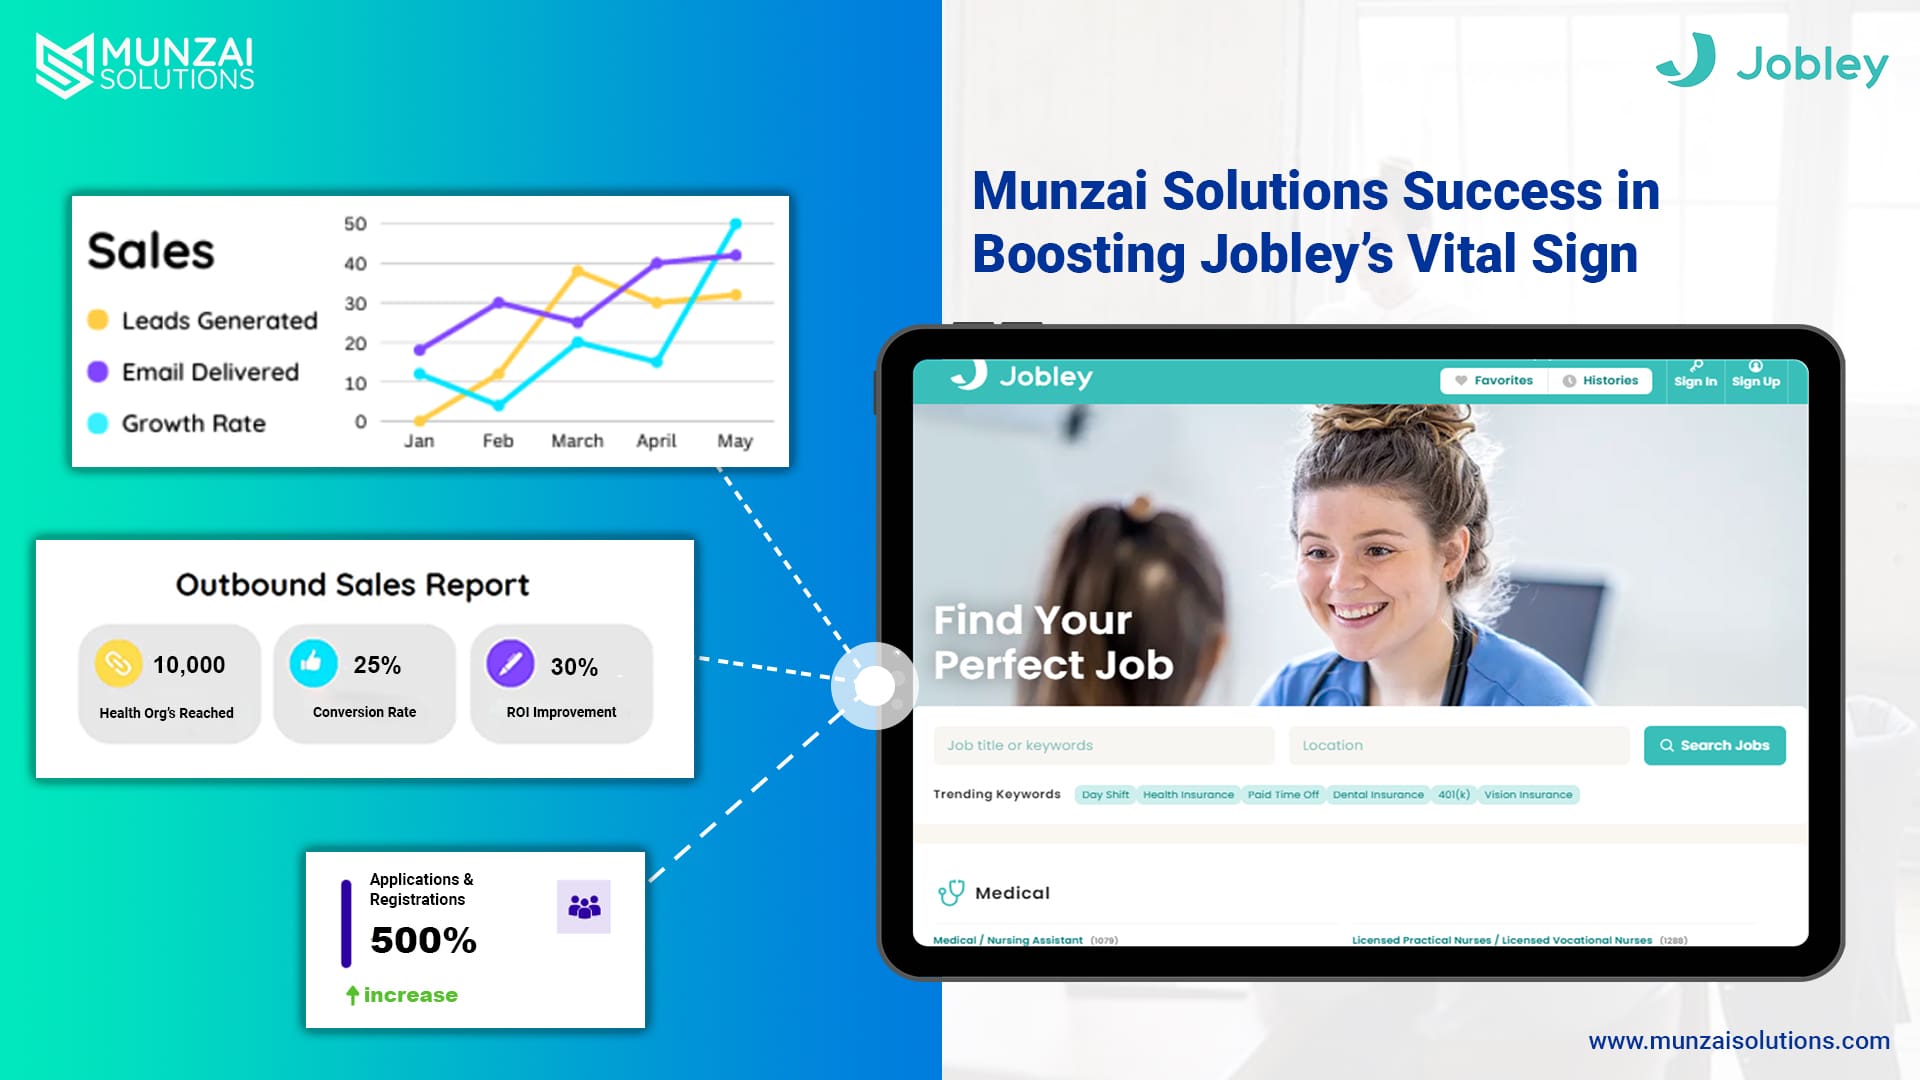 Jobley CaseStudy with Munzai Solutions